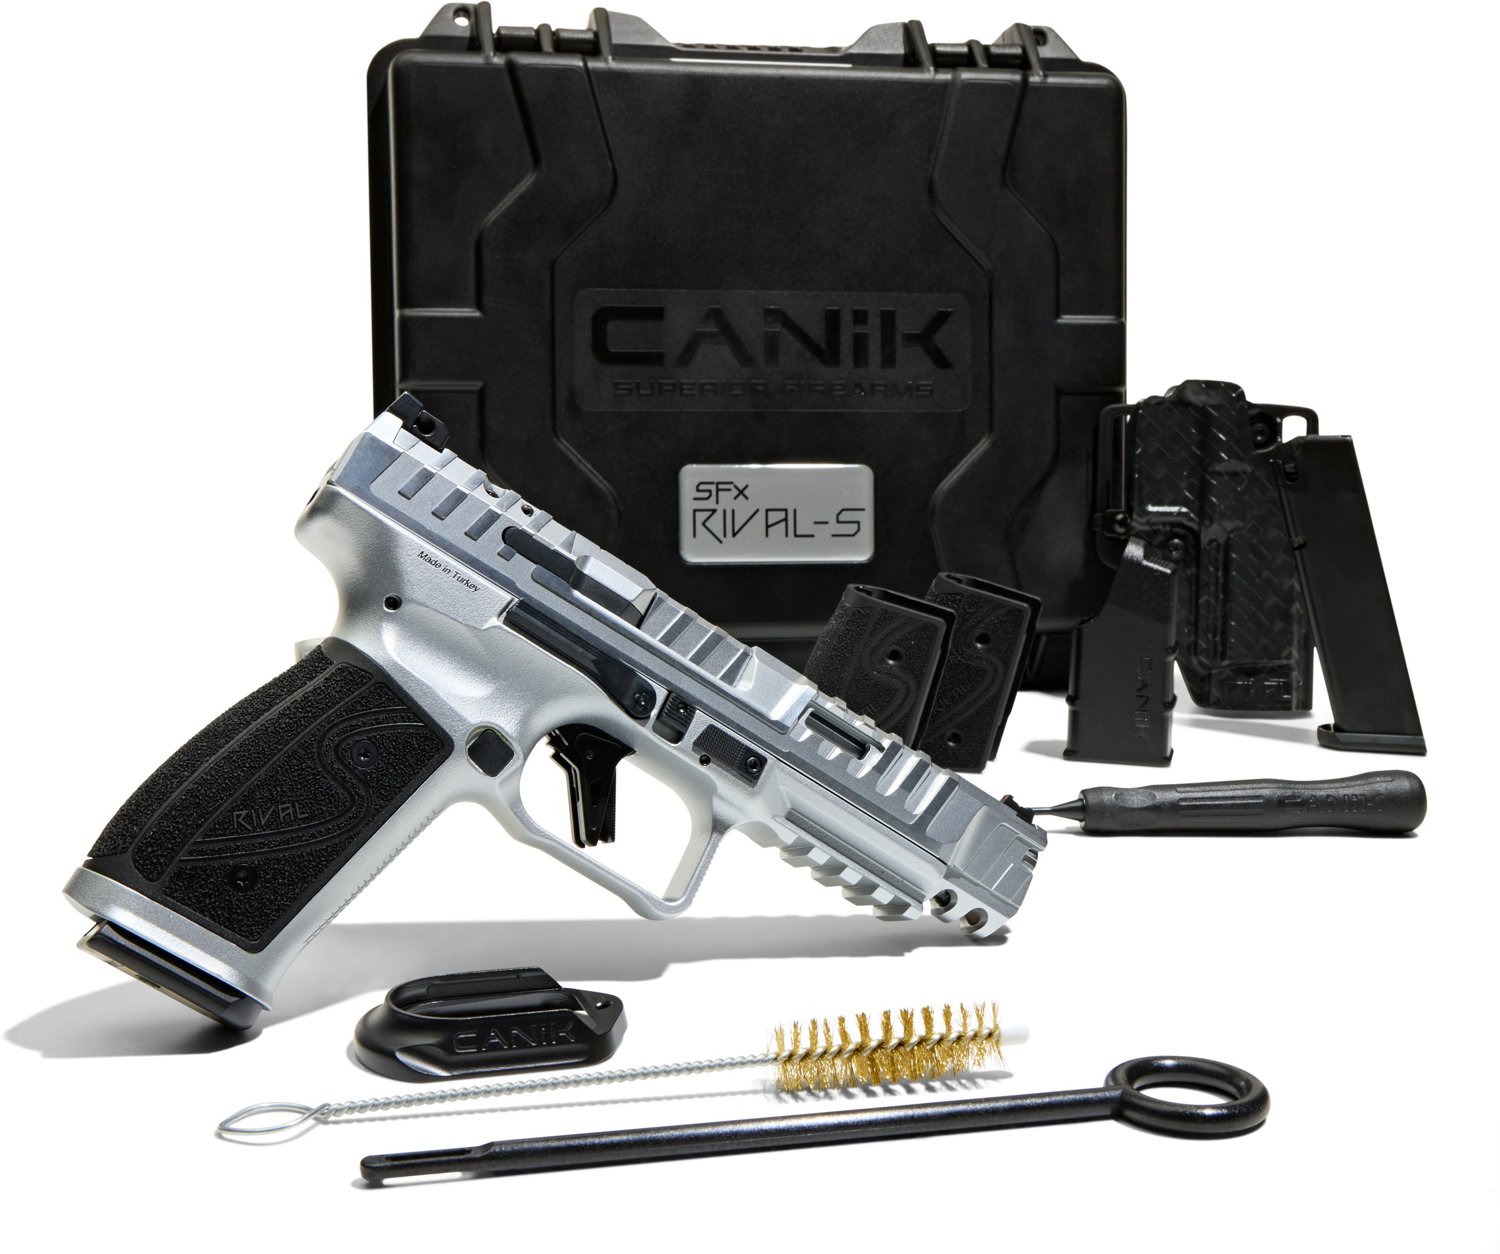 canik sfx rival-s for sale